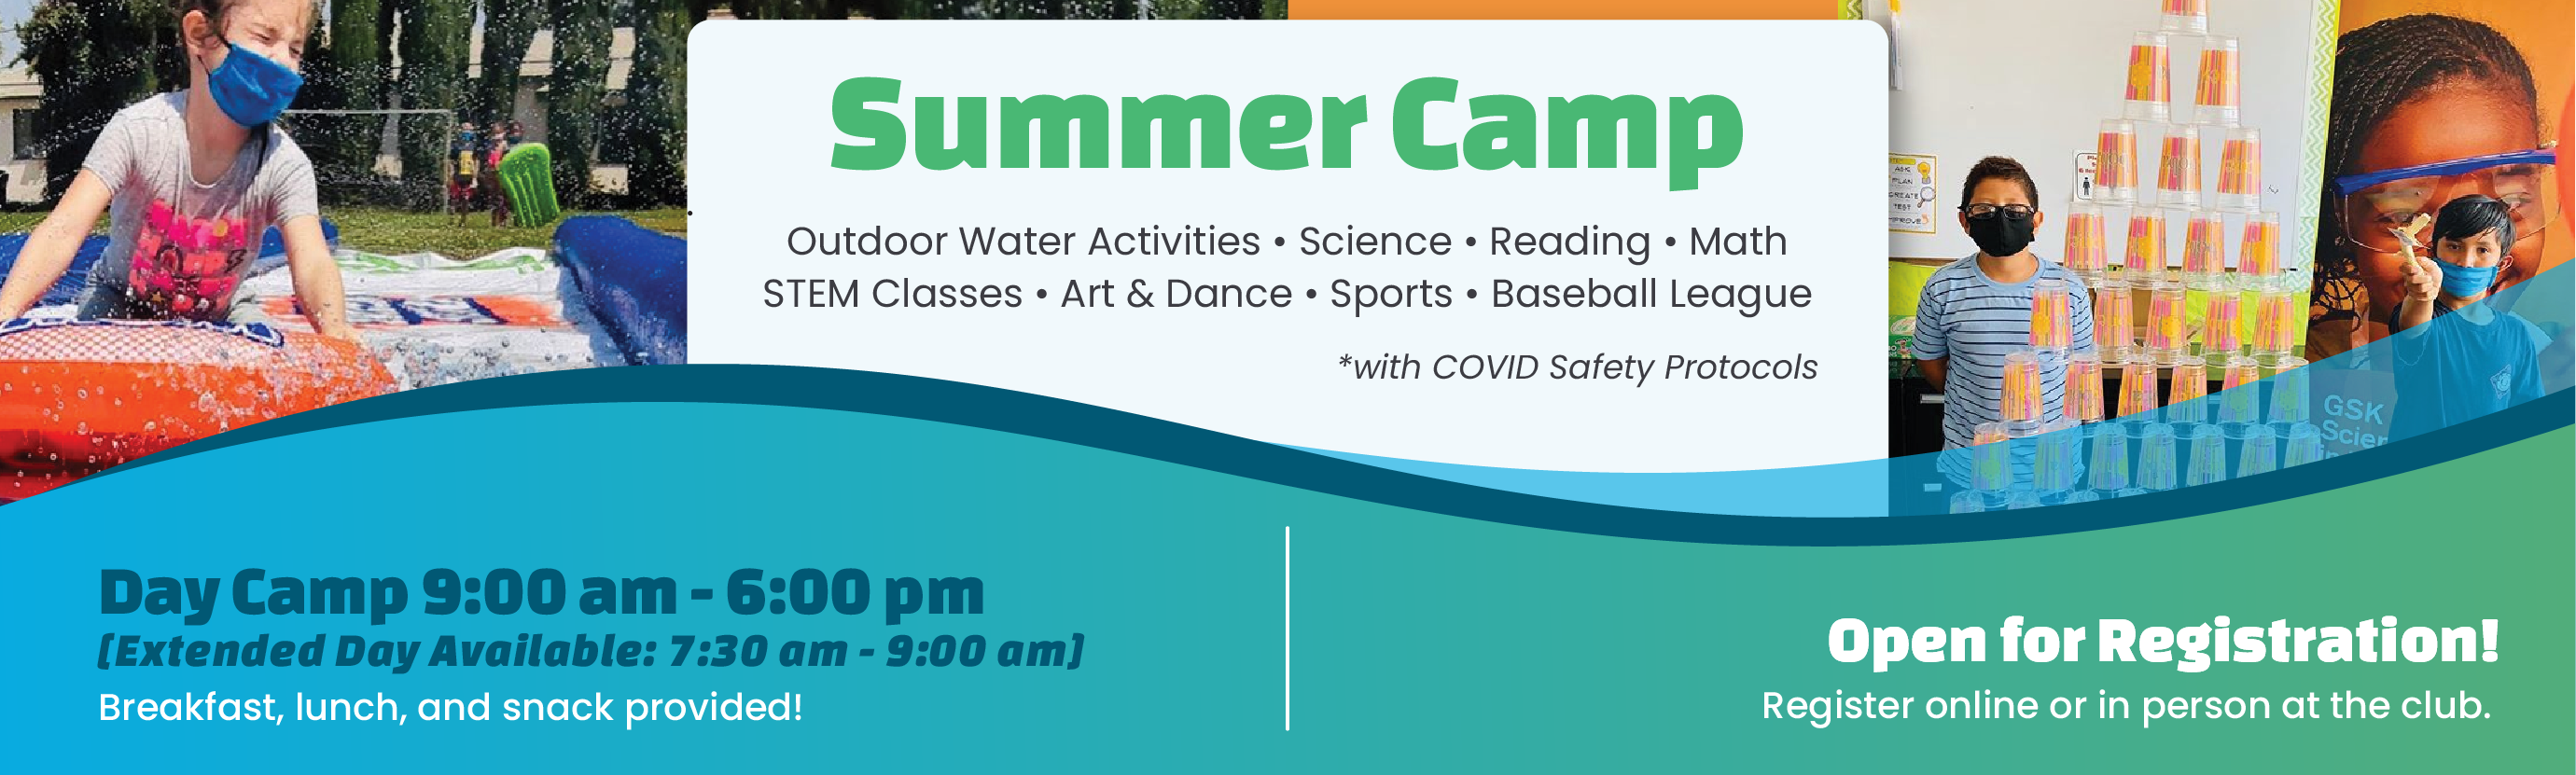 Summer Camp. Outdoor Water Activities • Science • Reading • Math • STEM Classes • Art & Dance • Sports • Baseball League • *with COVID Safety Protocols. Day Camp 9:00 am - 6:00 pm. Extended Day Available: 7:30 am - 9:00 am. Breakfast, lunch, and snack provided! Open for Registration! Register online or in person at the club.